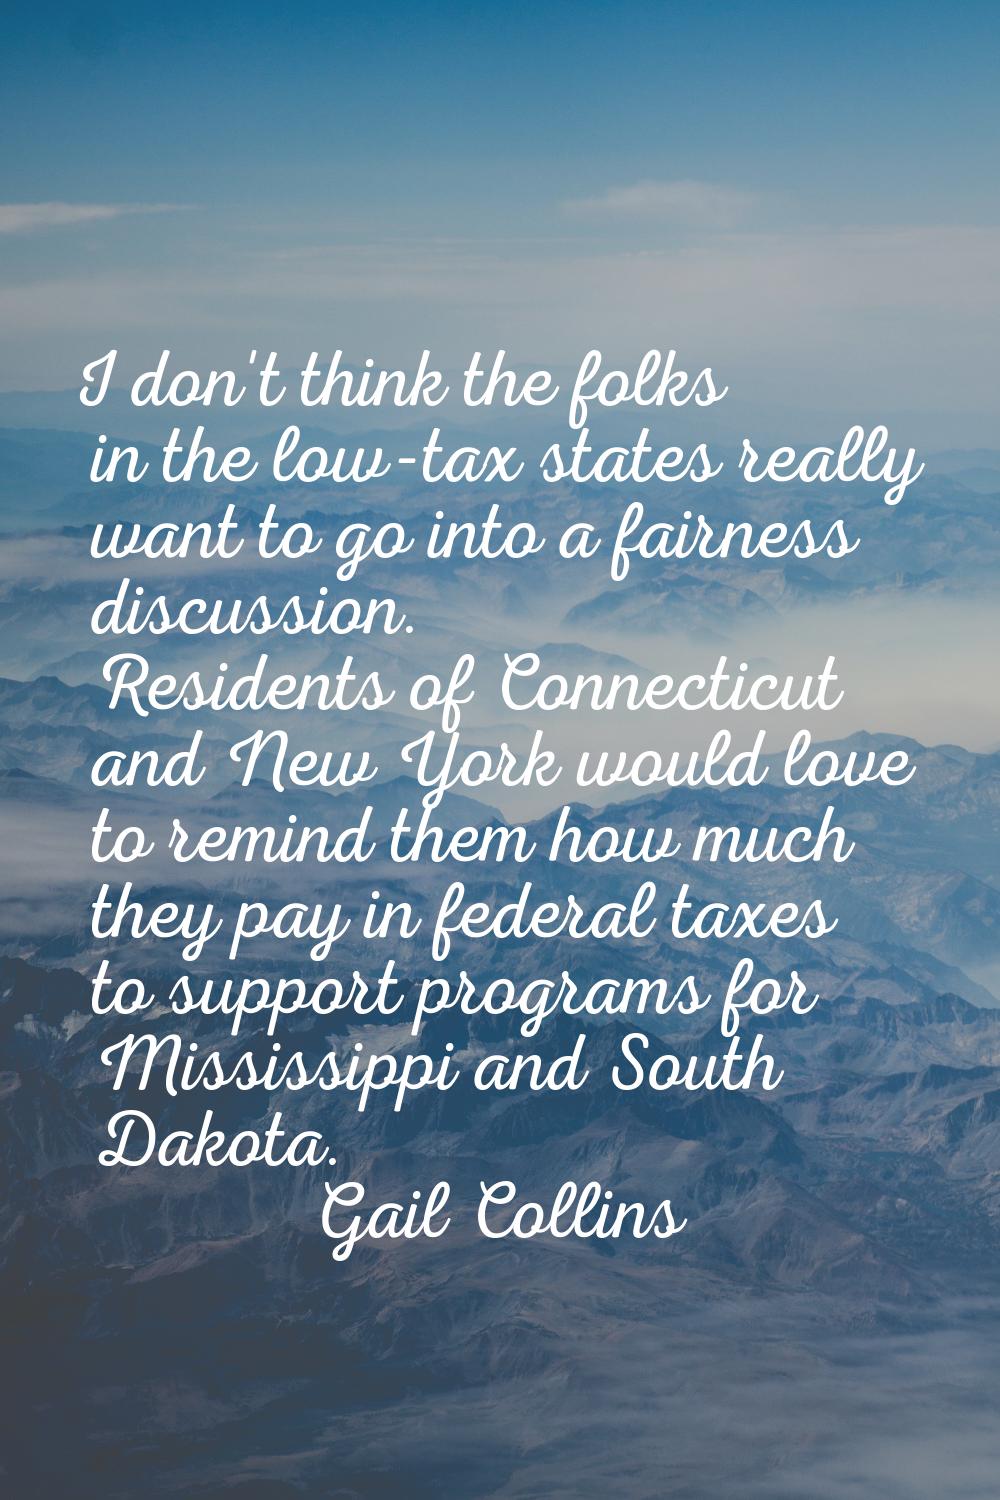 I don't think the folks in the low-tax states really want to go into a fairness discussion. Residen